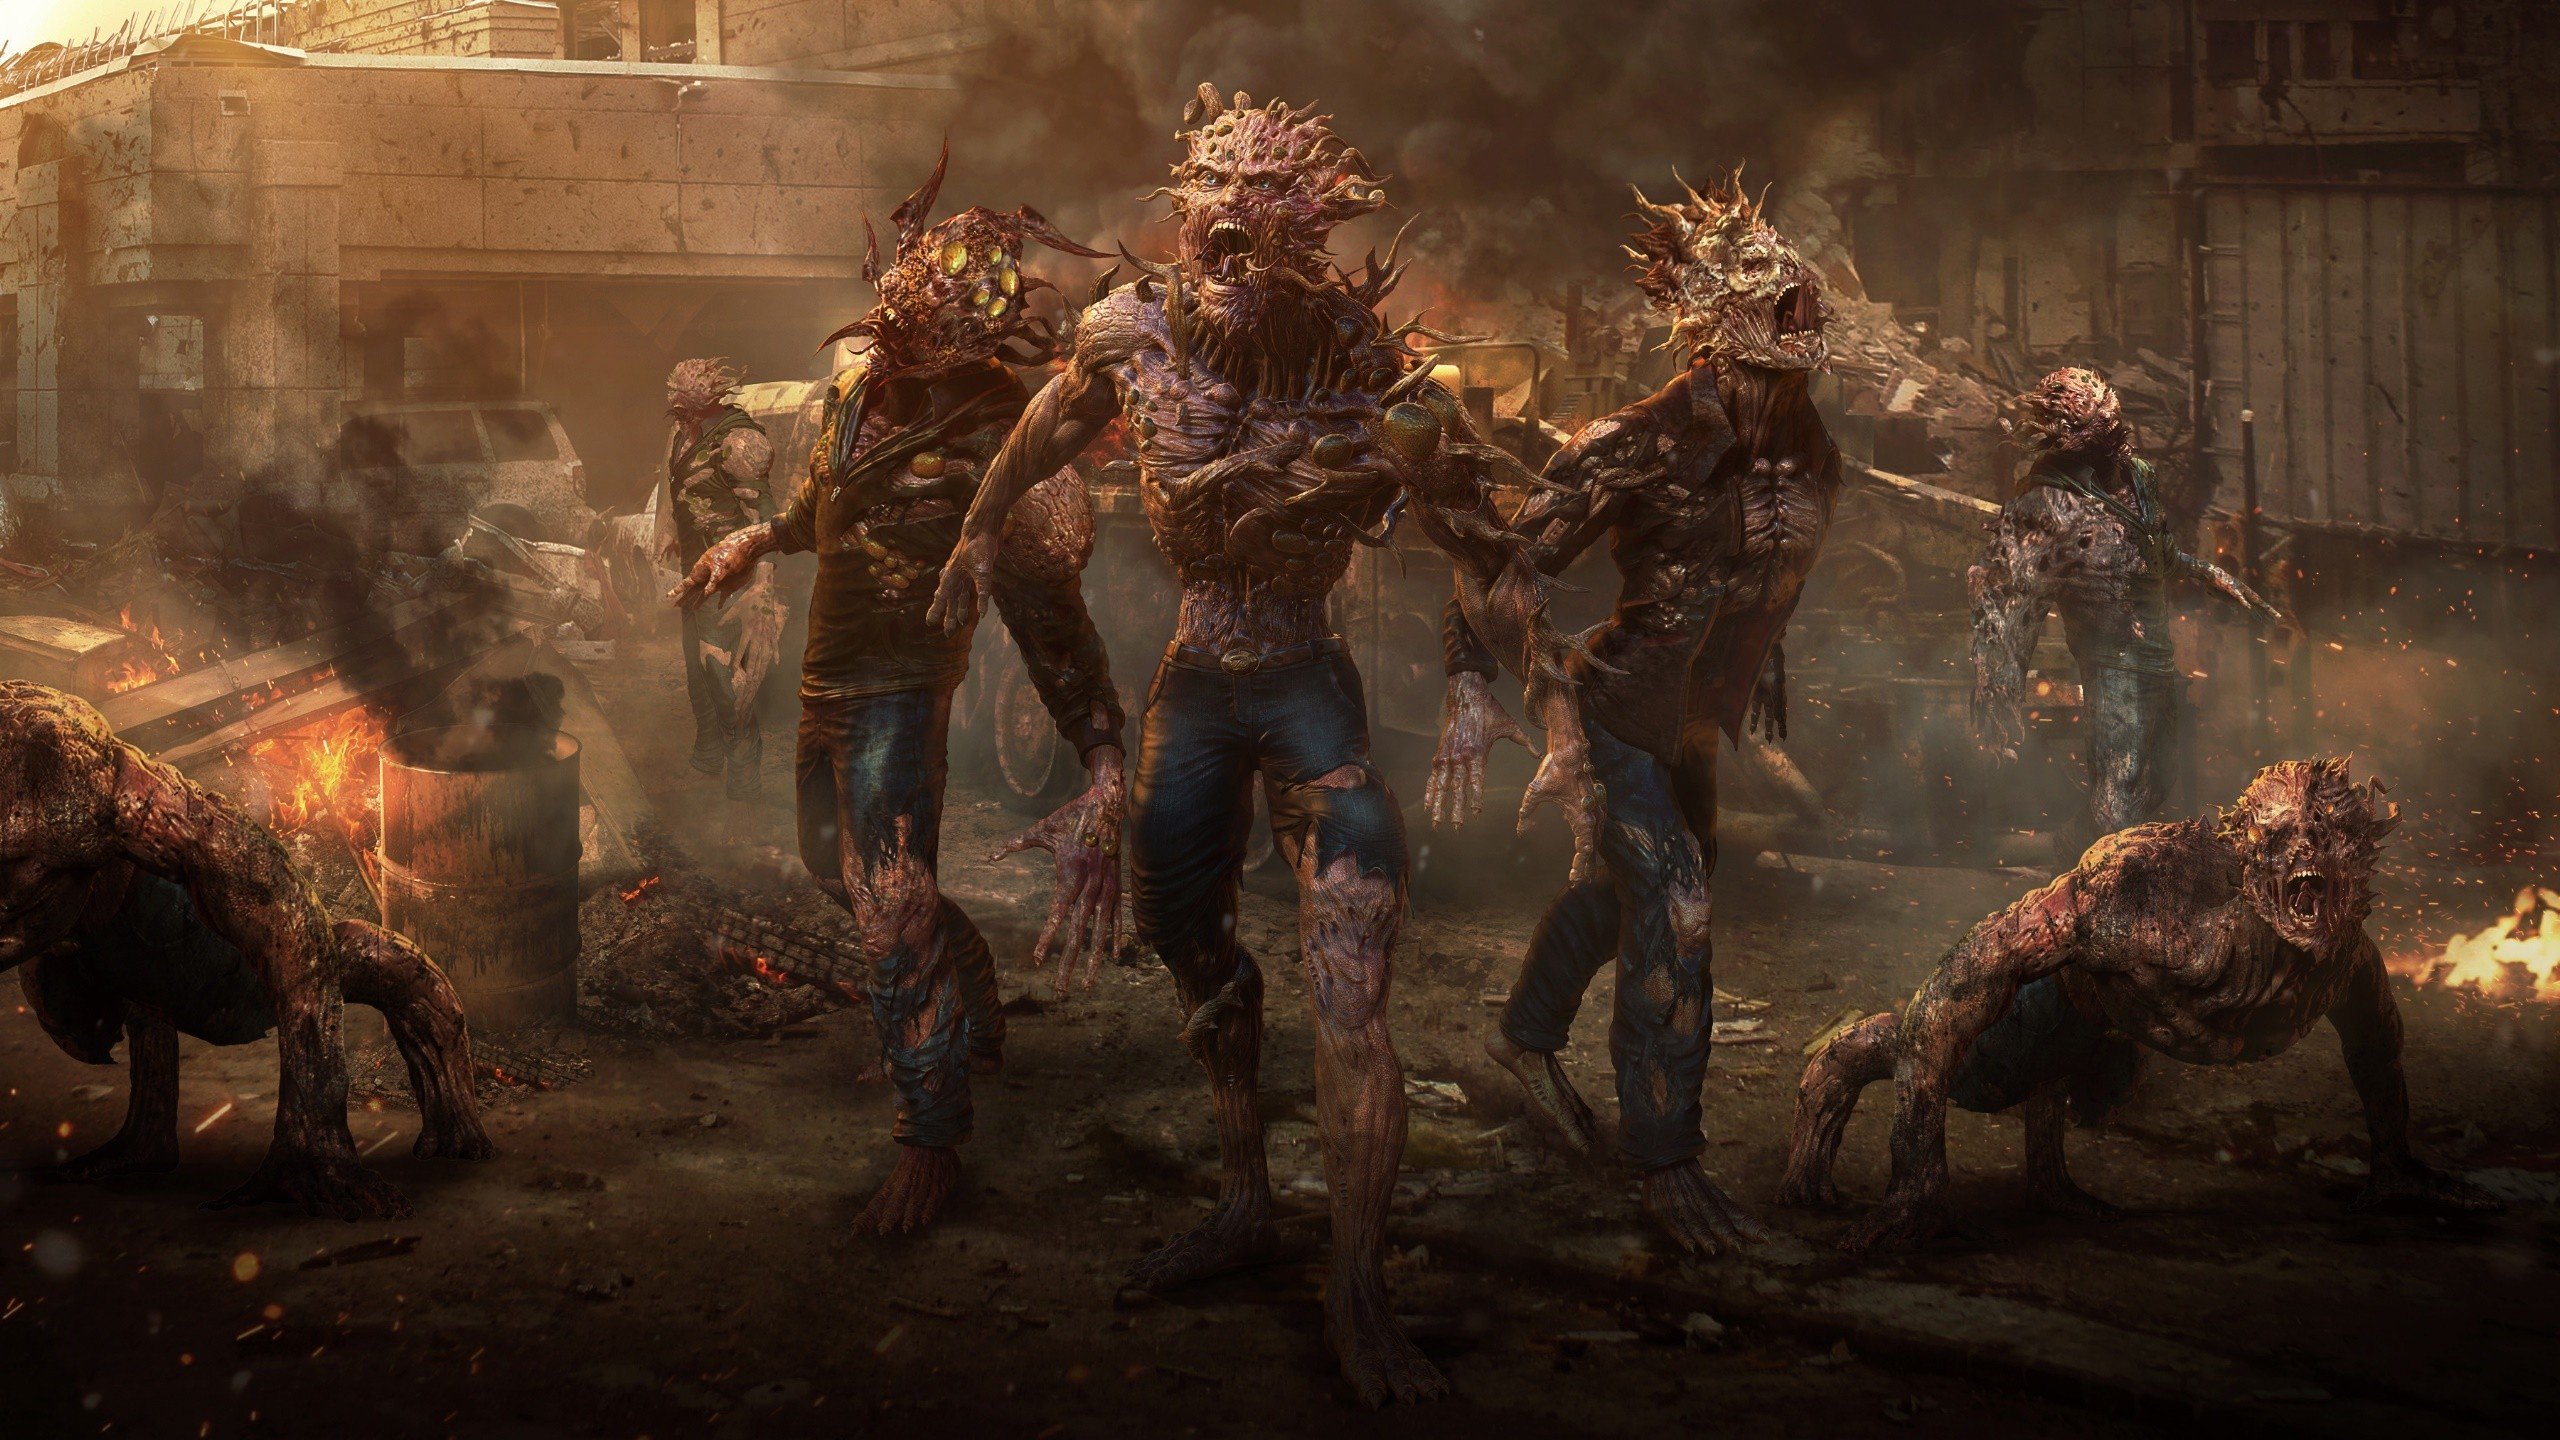 Call of duty zombies online, free